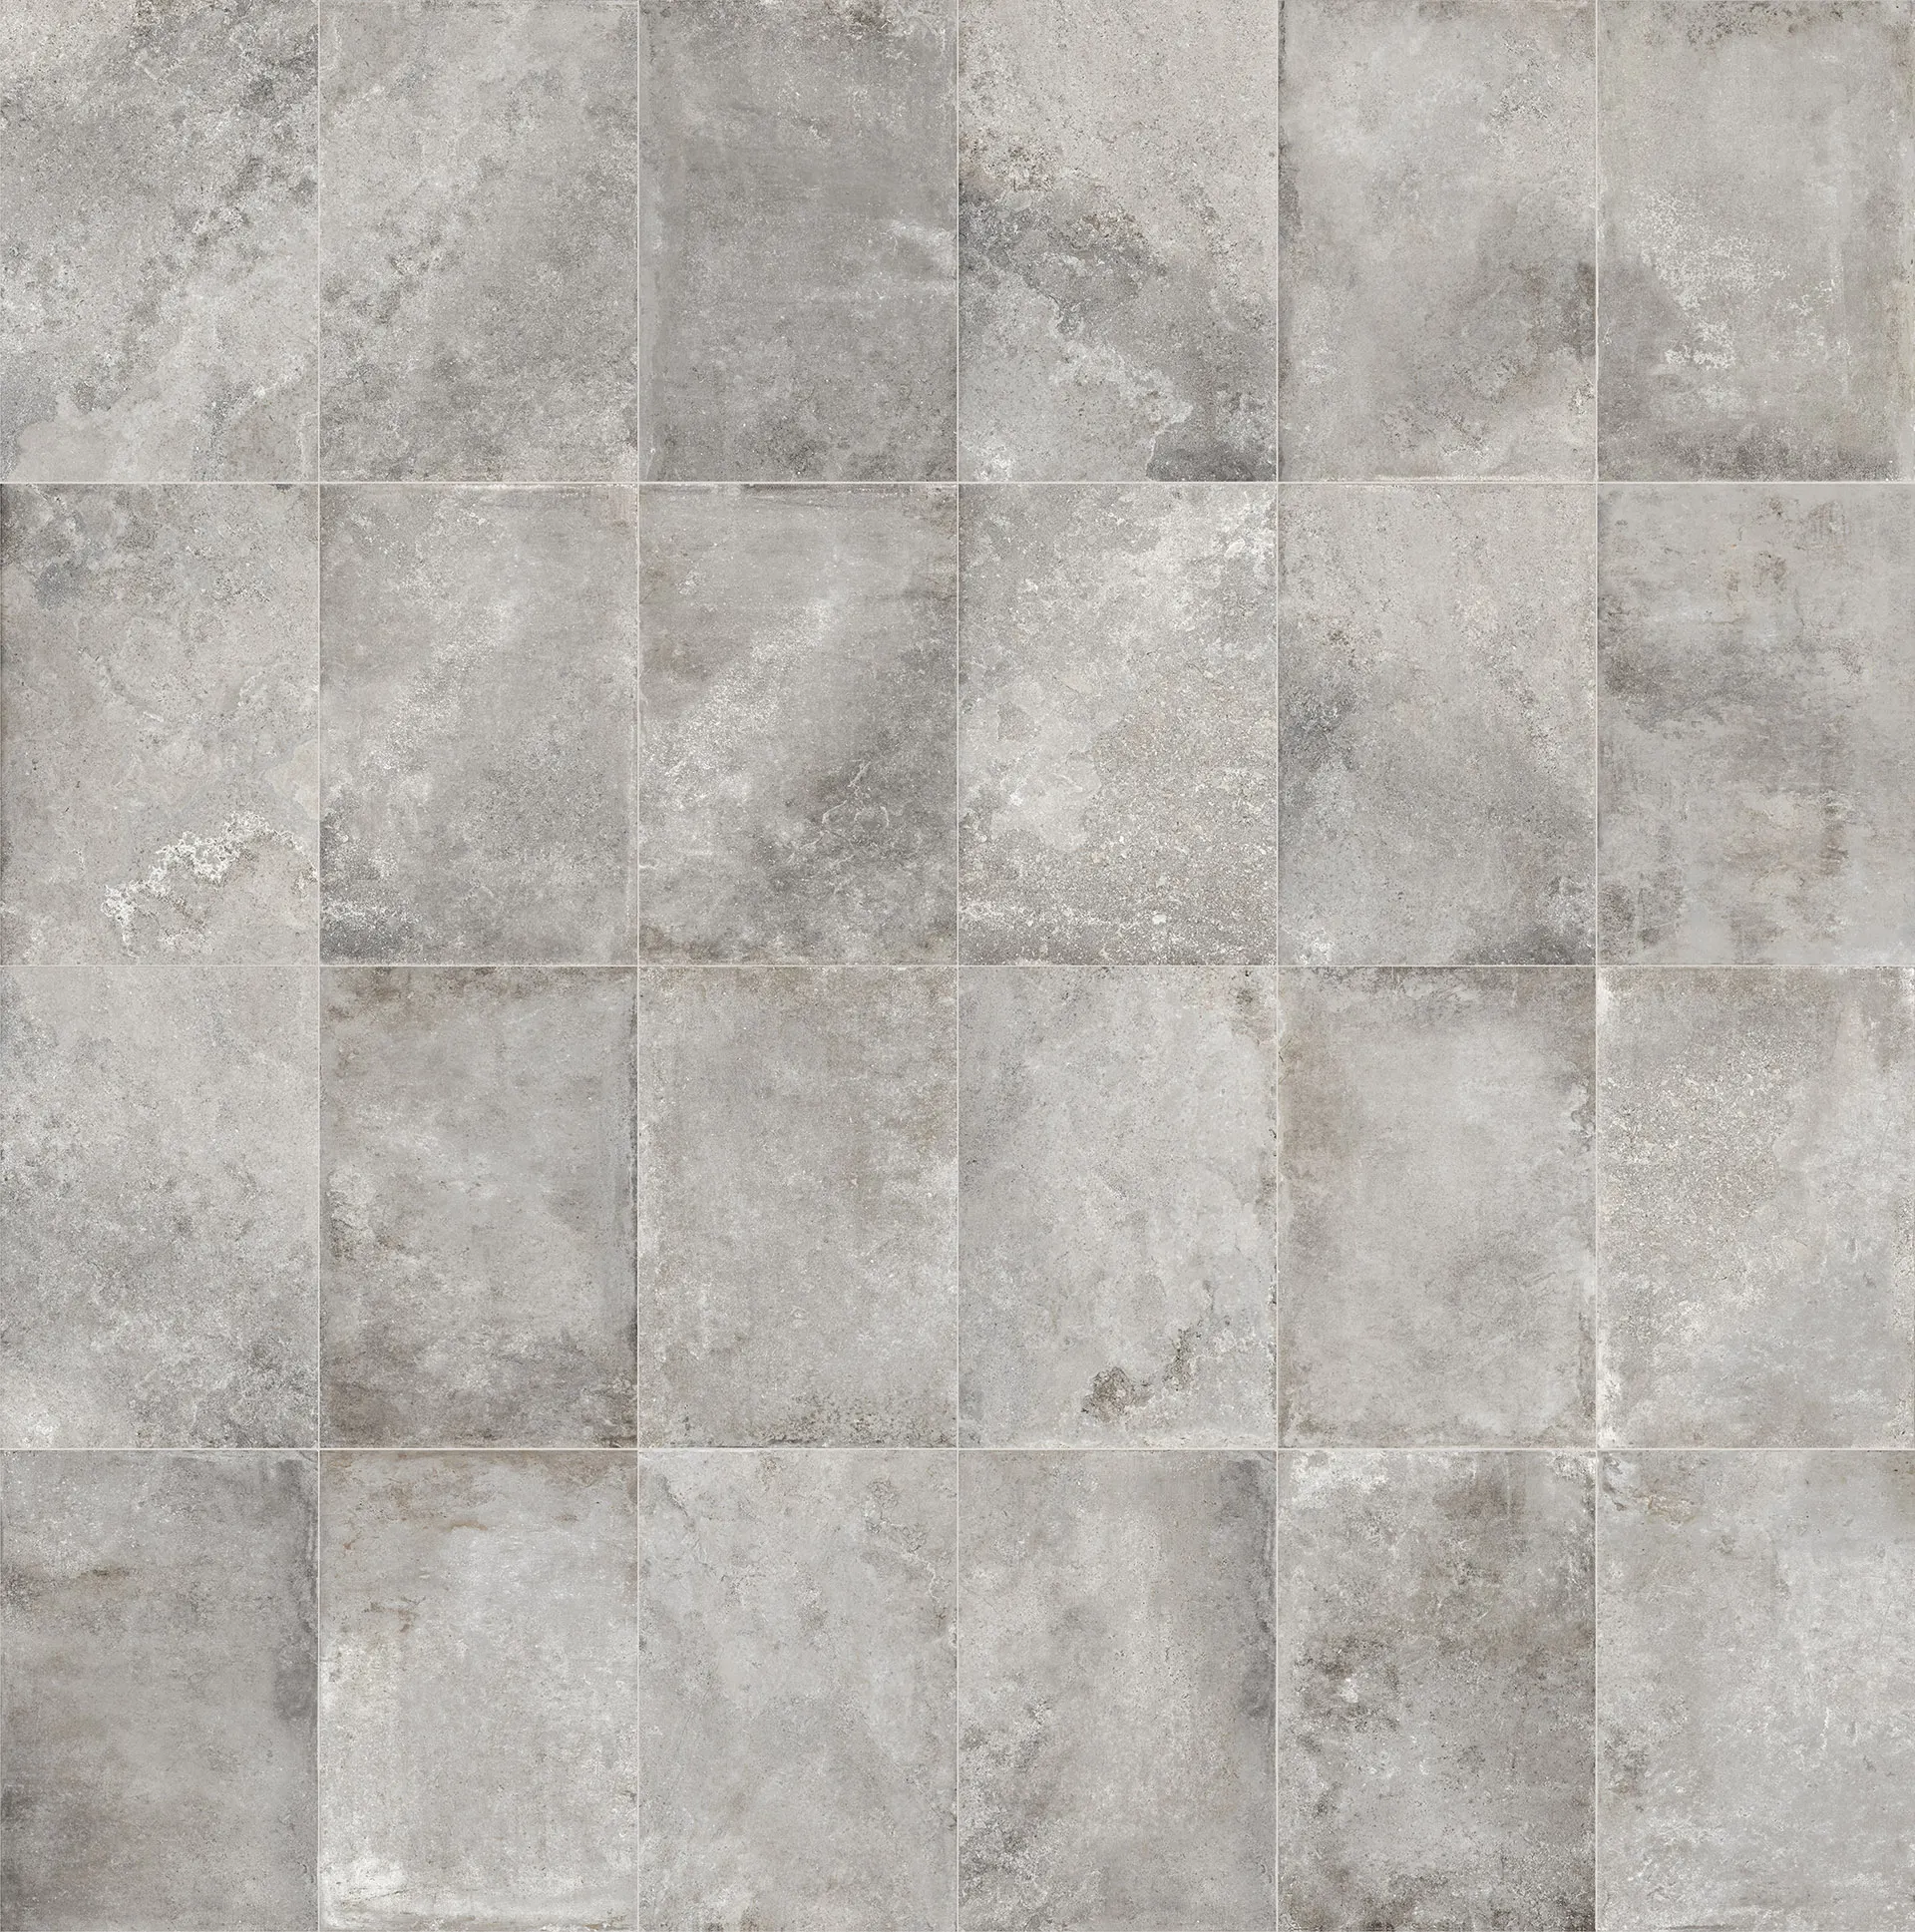 Stone-look porcelain tiles embody the epitome of luxury in architecture.